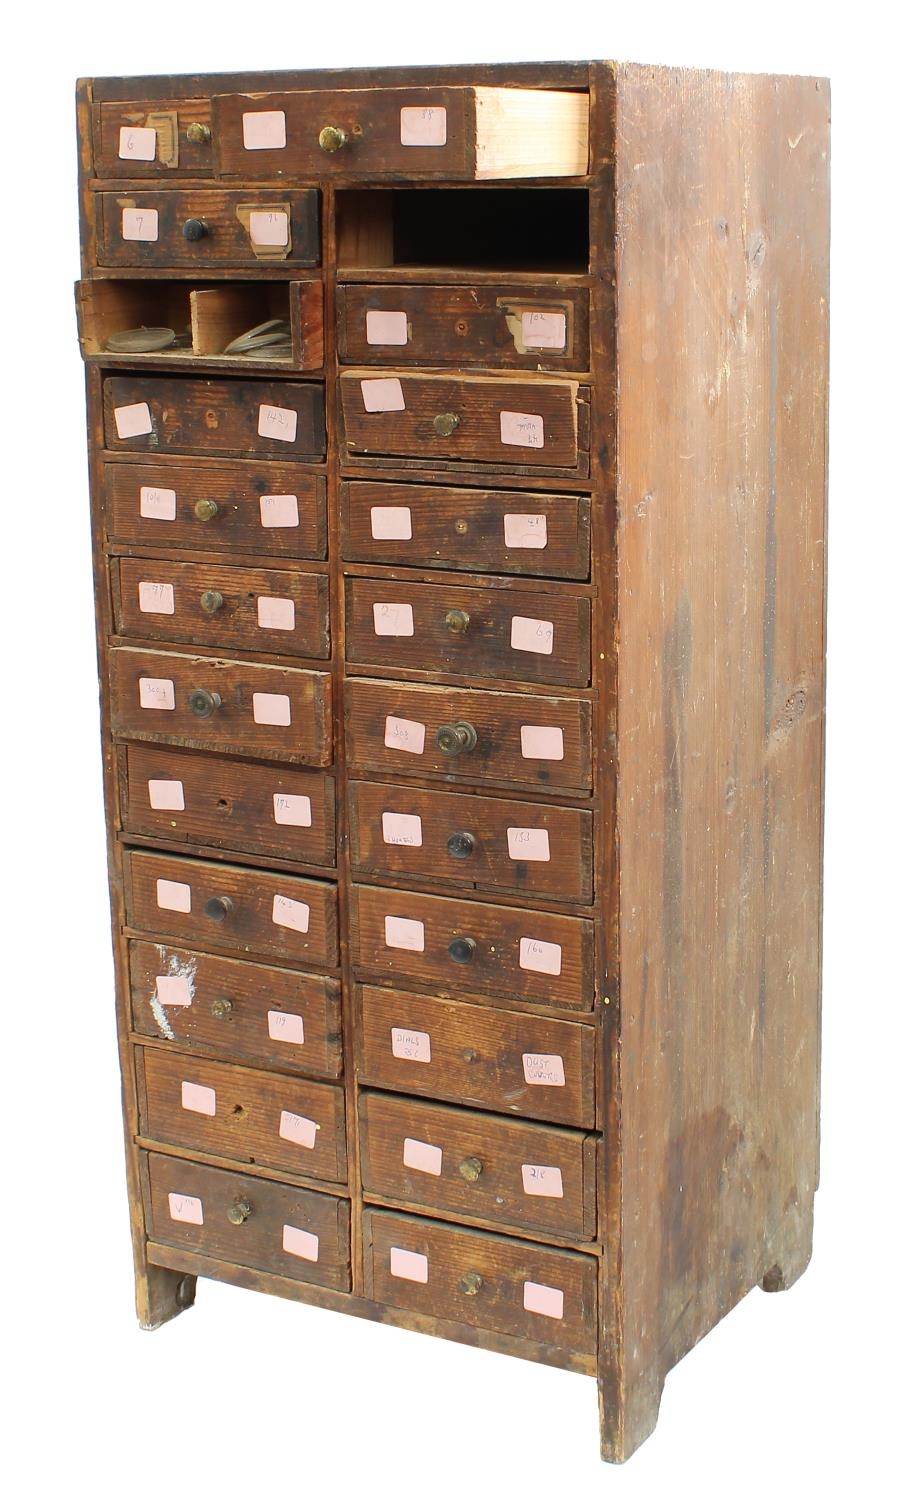 Twelve drawer wooden chest containing a quantity of assorted watch glasses of various sizes, 27.